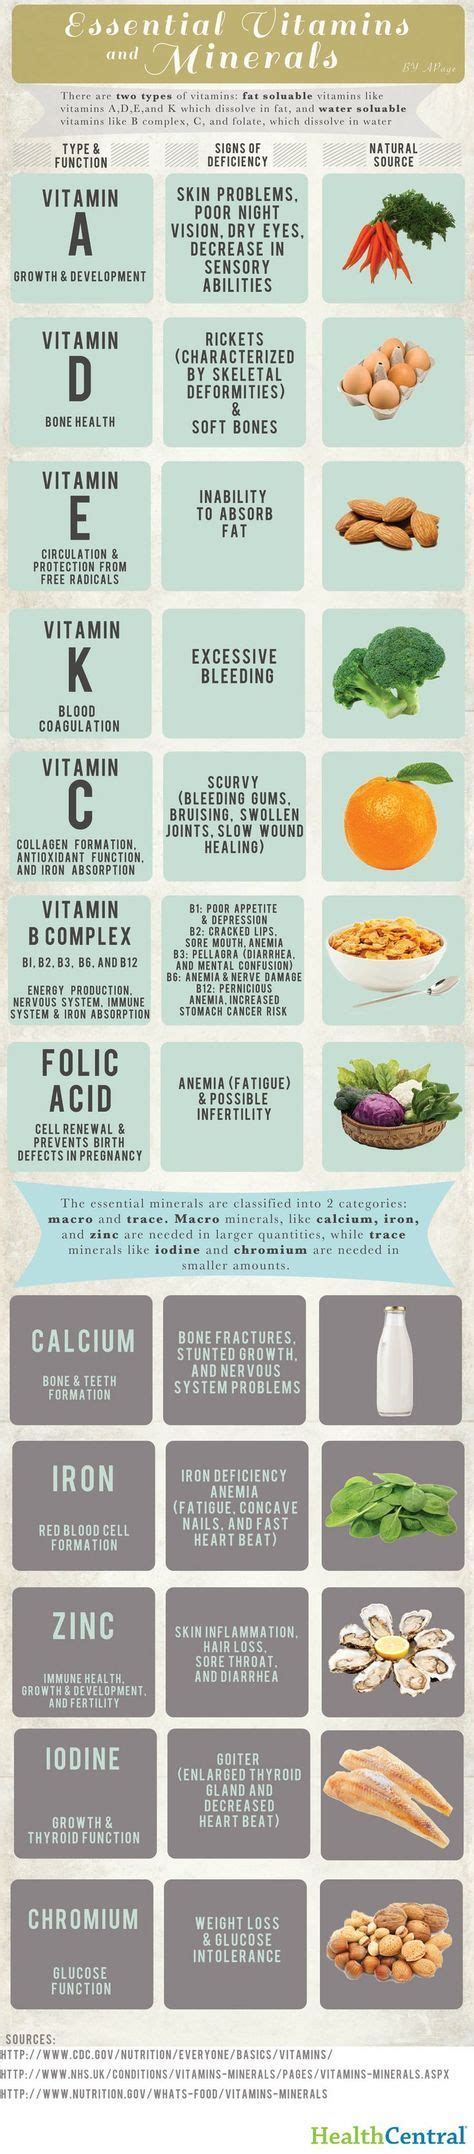 This Infographic Explains The Two Main Categories Of Vitamins And Which